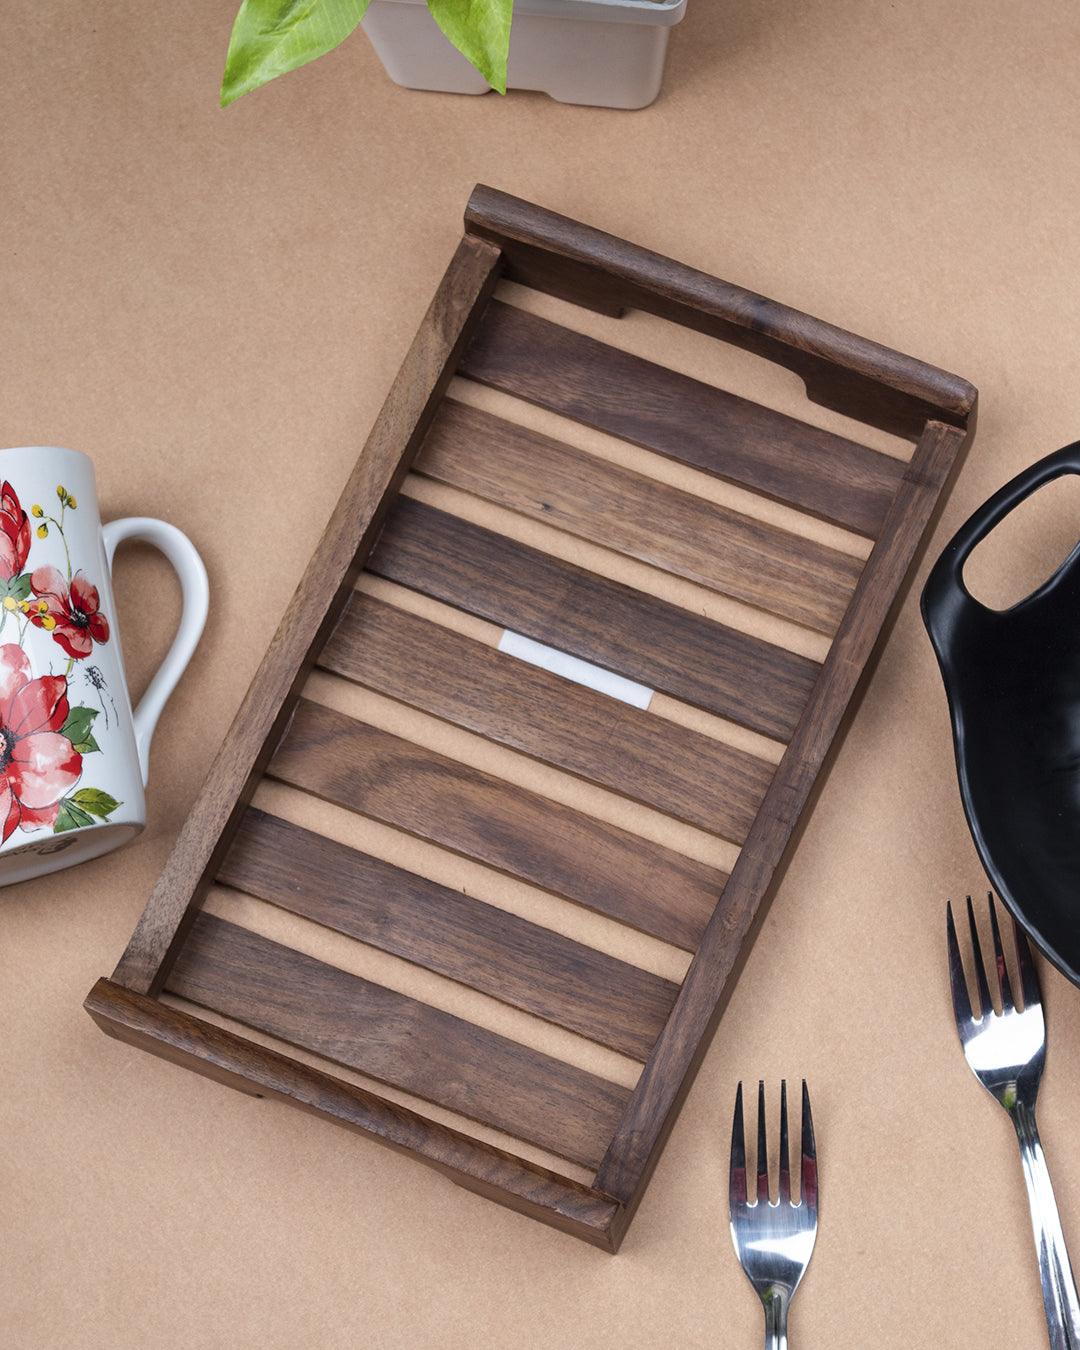 'Sheesham Wood' Handcrafted Small Serving Trays In Sheesham Wood - MARKET 99